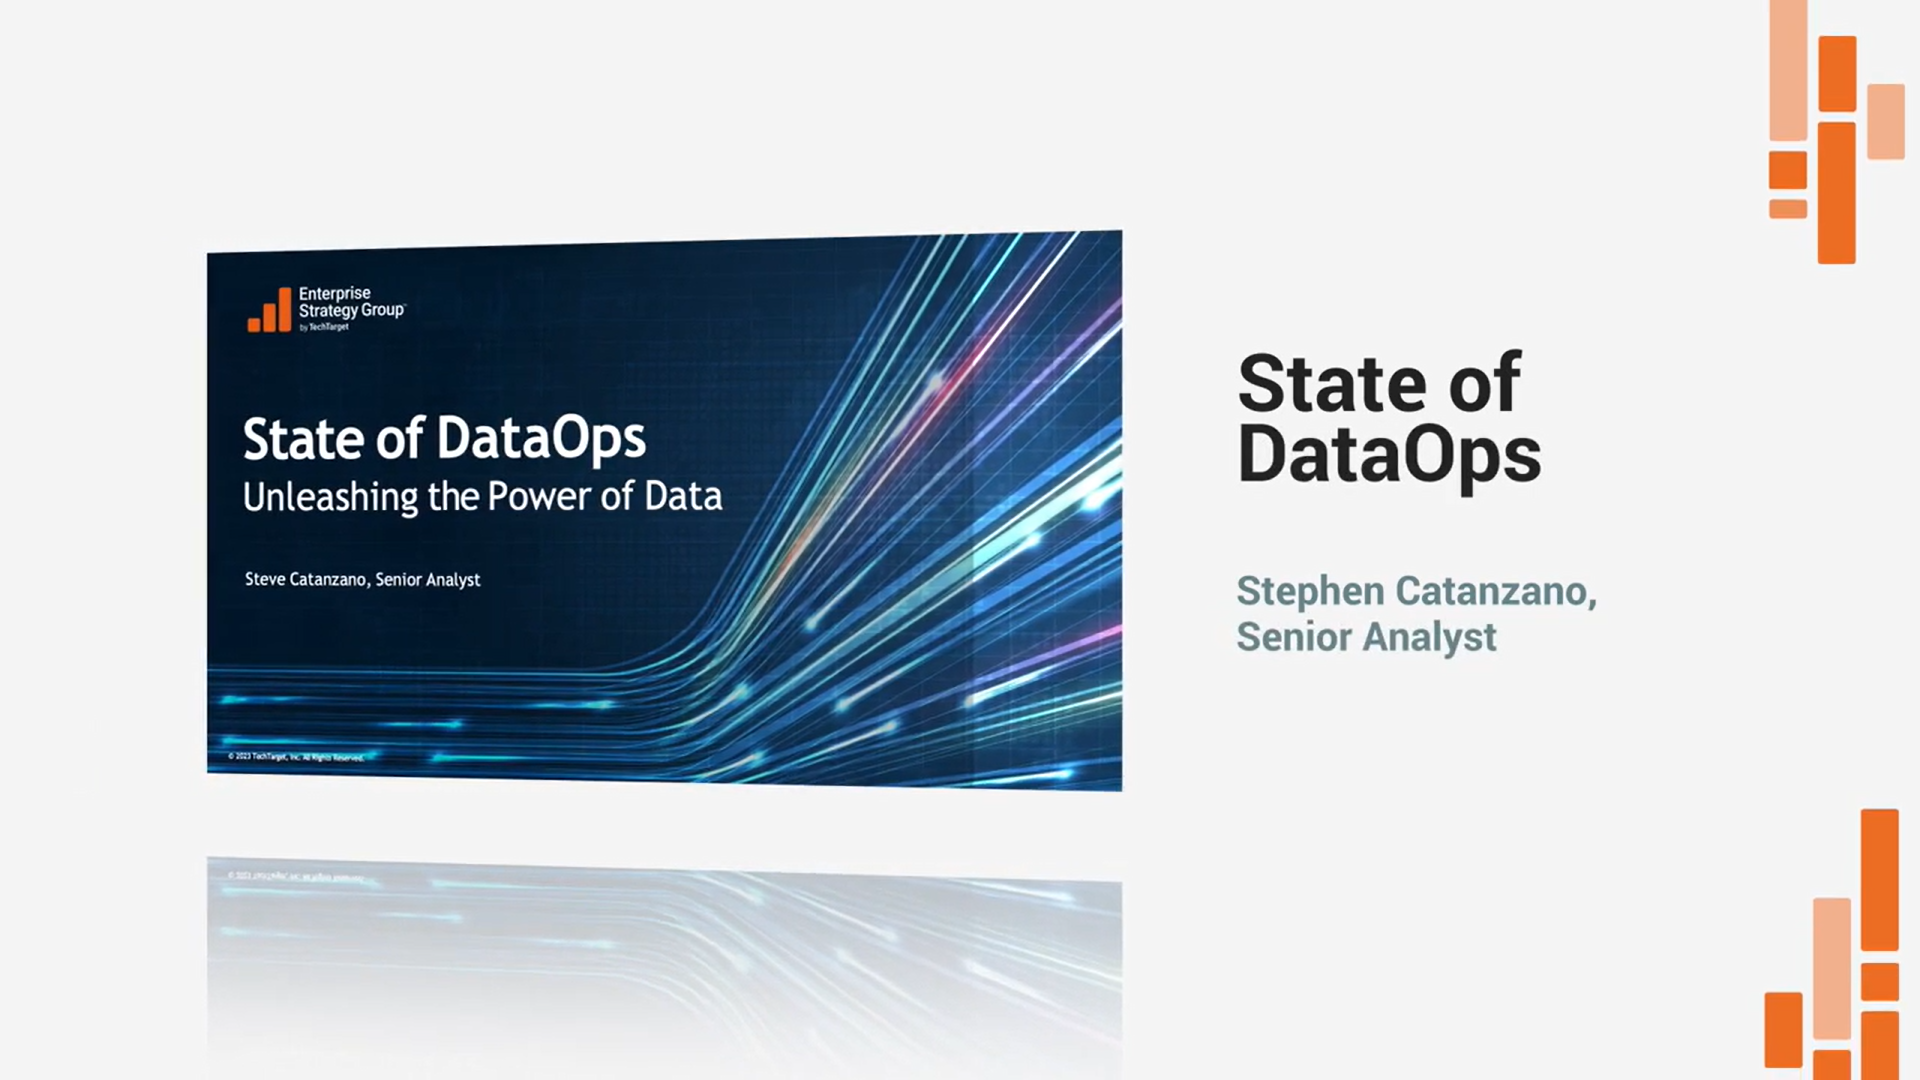 The State of DataOps – Unleashing the Power of Data